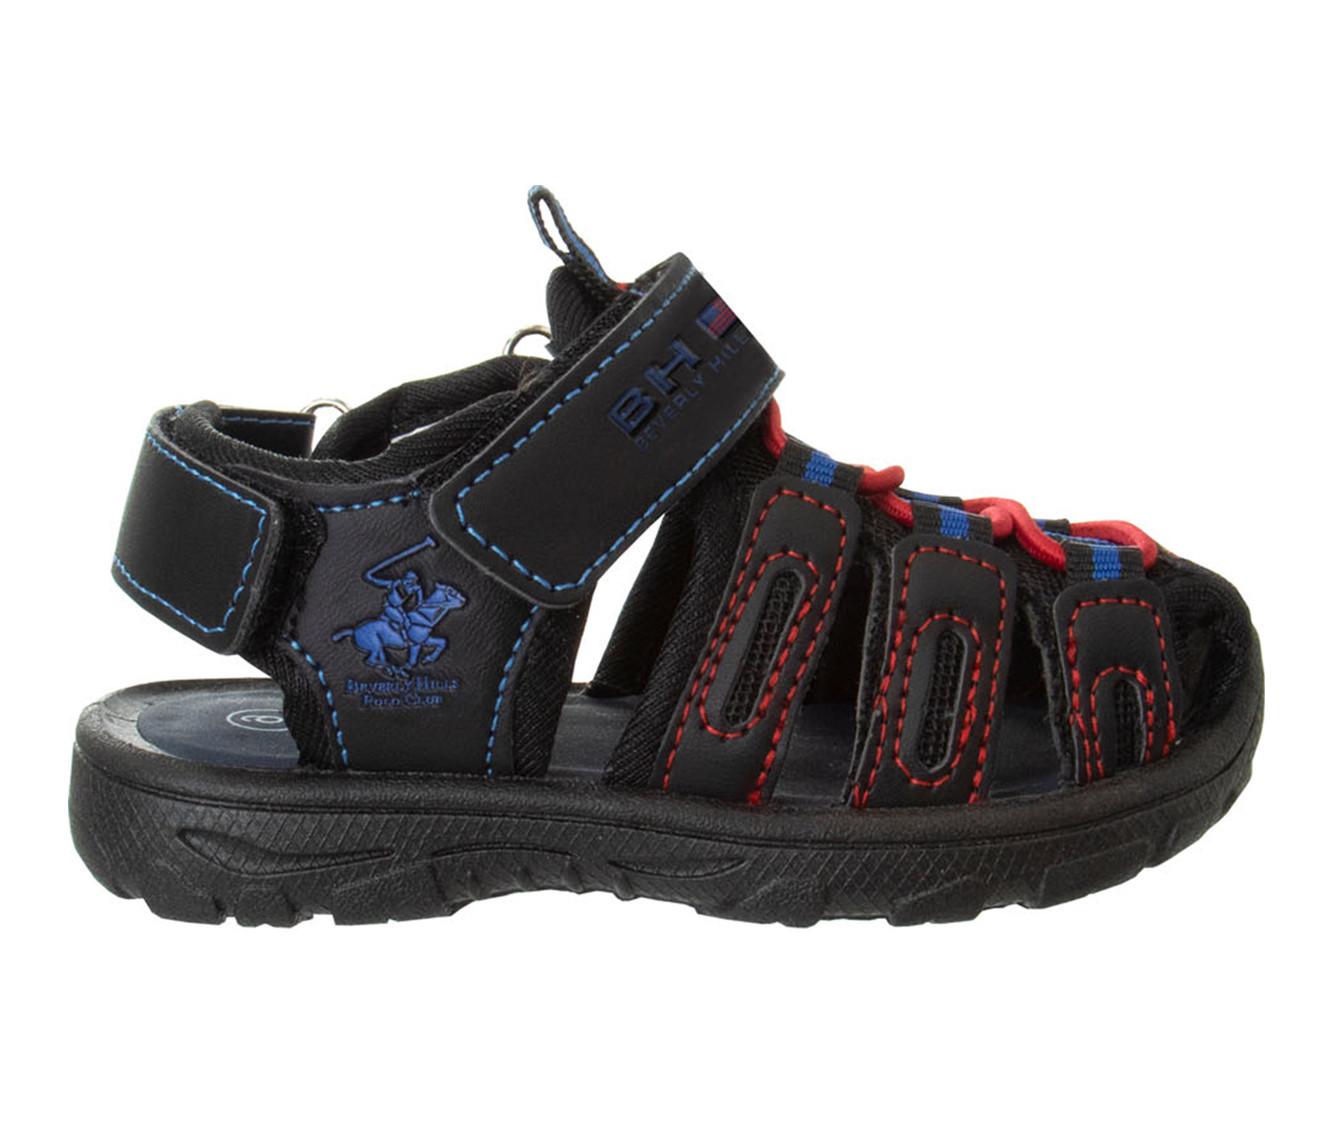 Boys' Beverly Hills Polo Club Comfort Crusade 5-10 Sandals